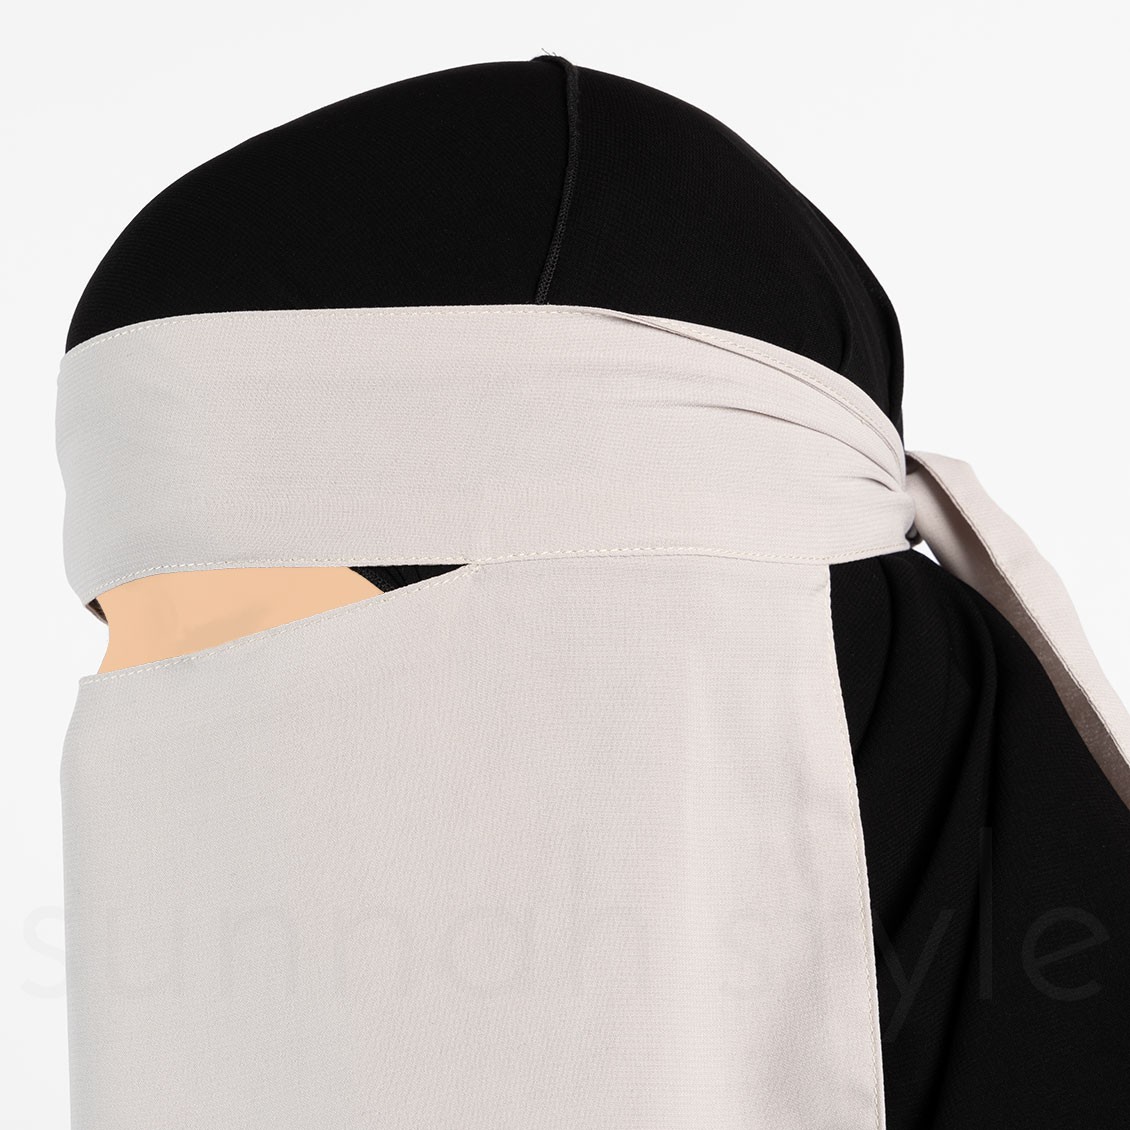 Sunnah Style One Layer One Piece Niqab Smoke